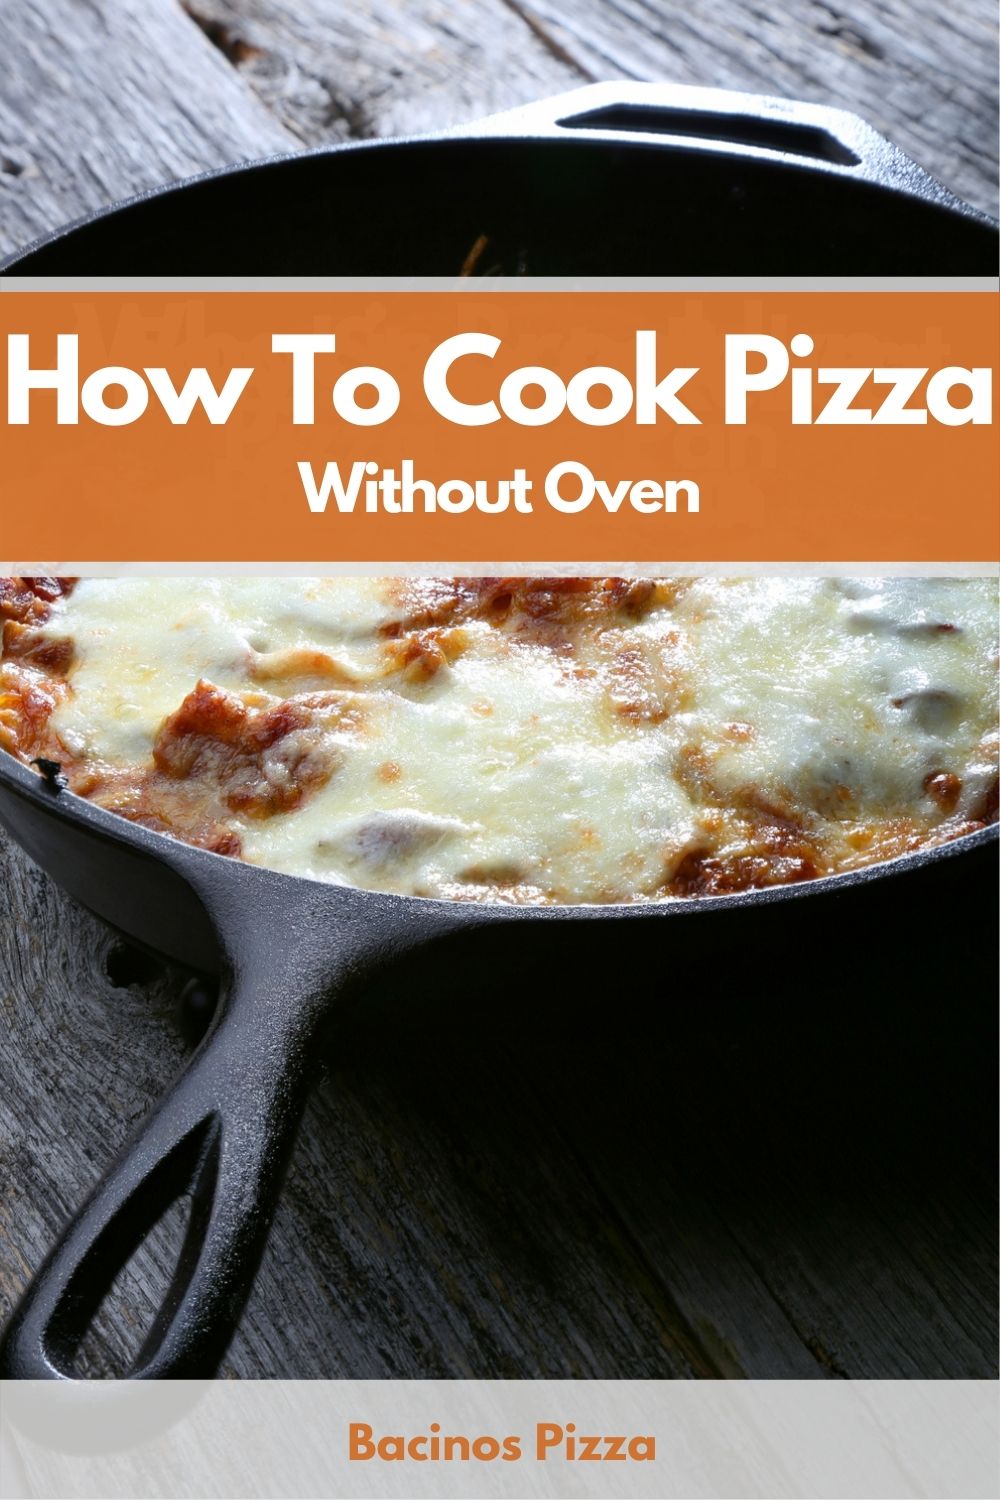 How To Cook Pizza Without Oven pin 2